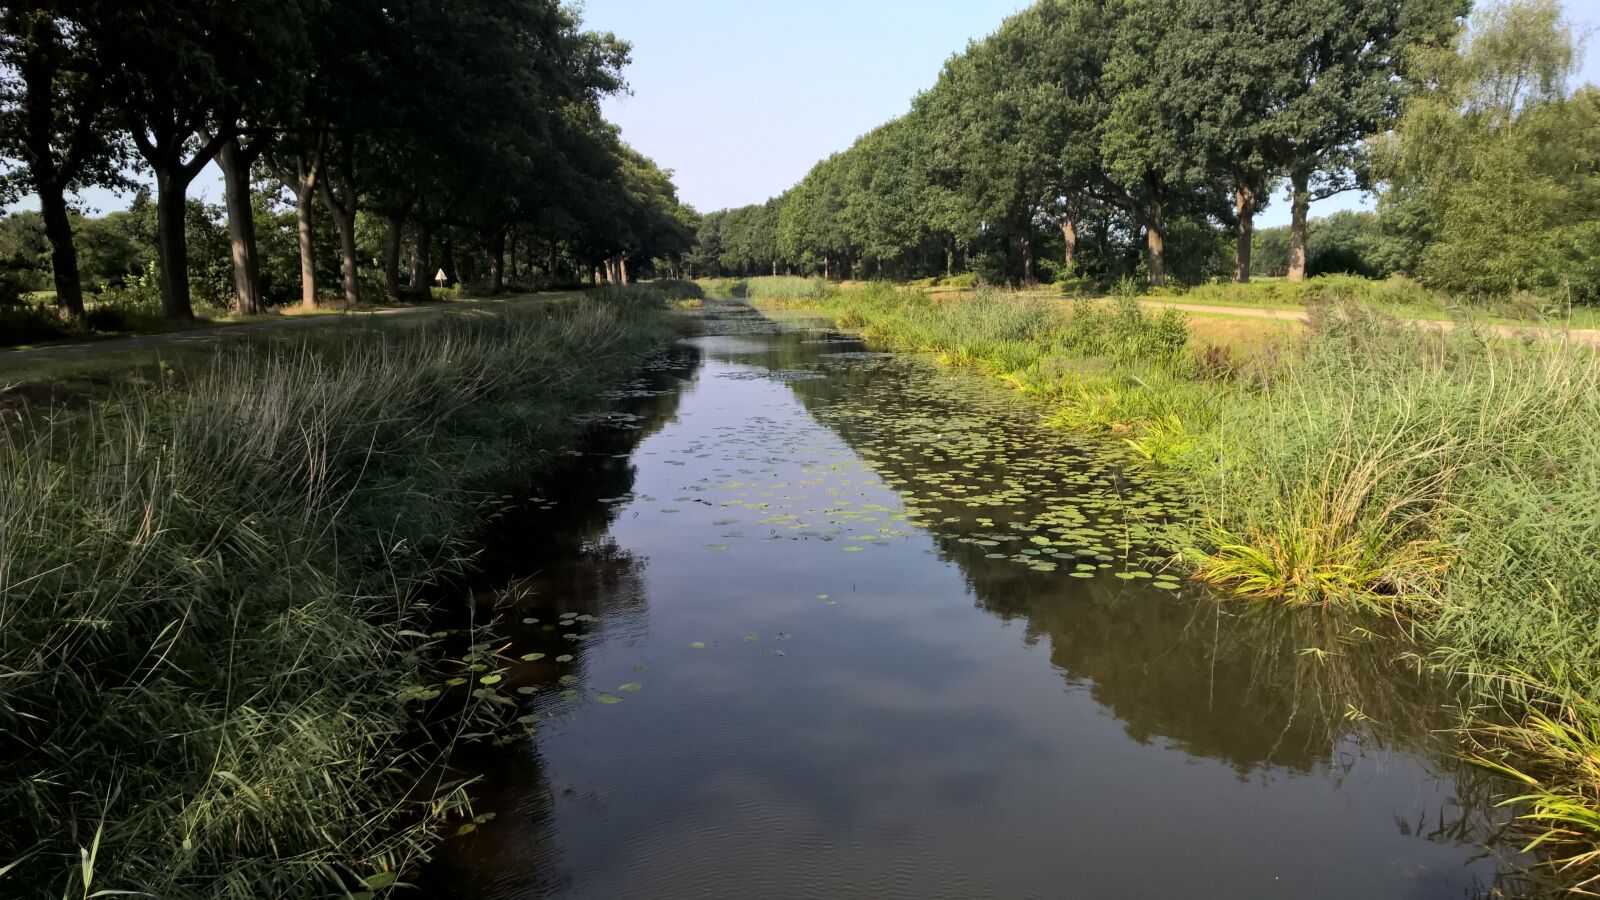 Nokia Lumia 1520 sample photo. Almelo nordhorn canal, channel photography